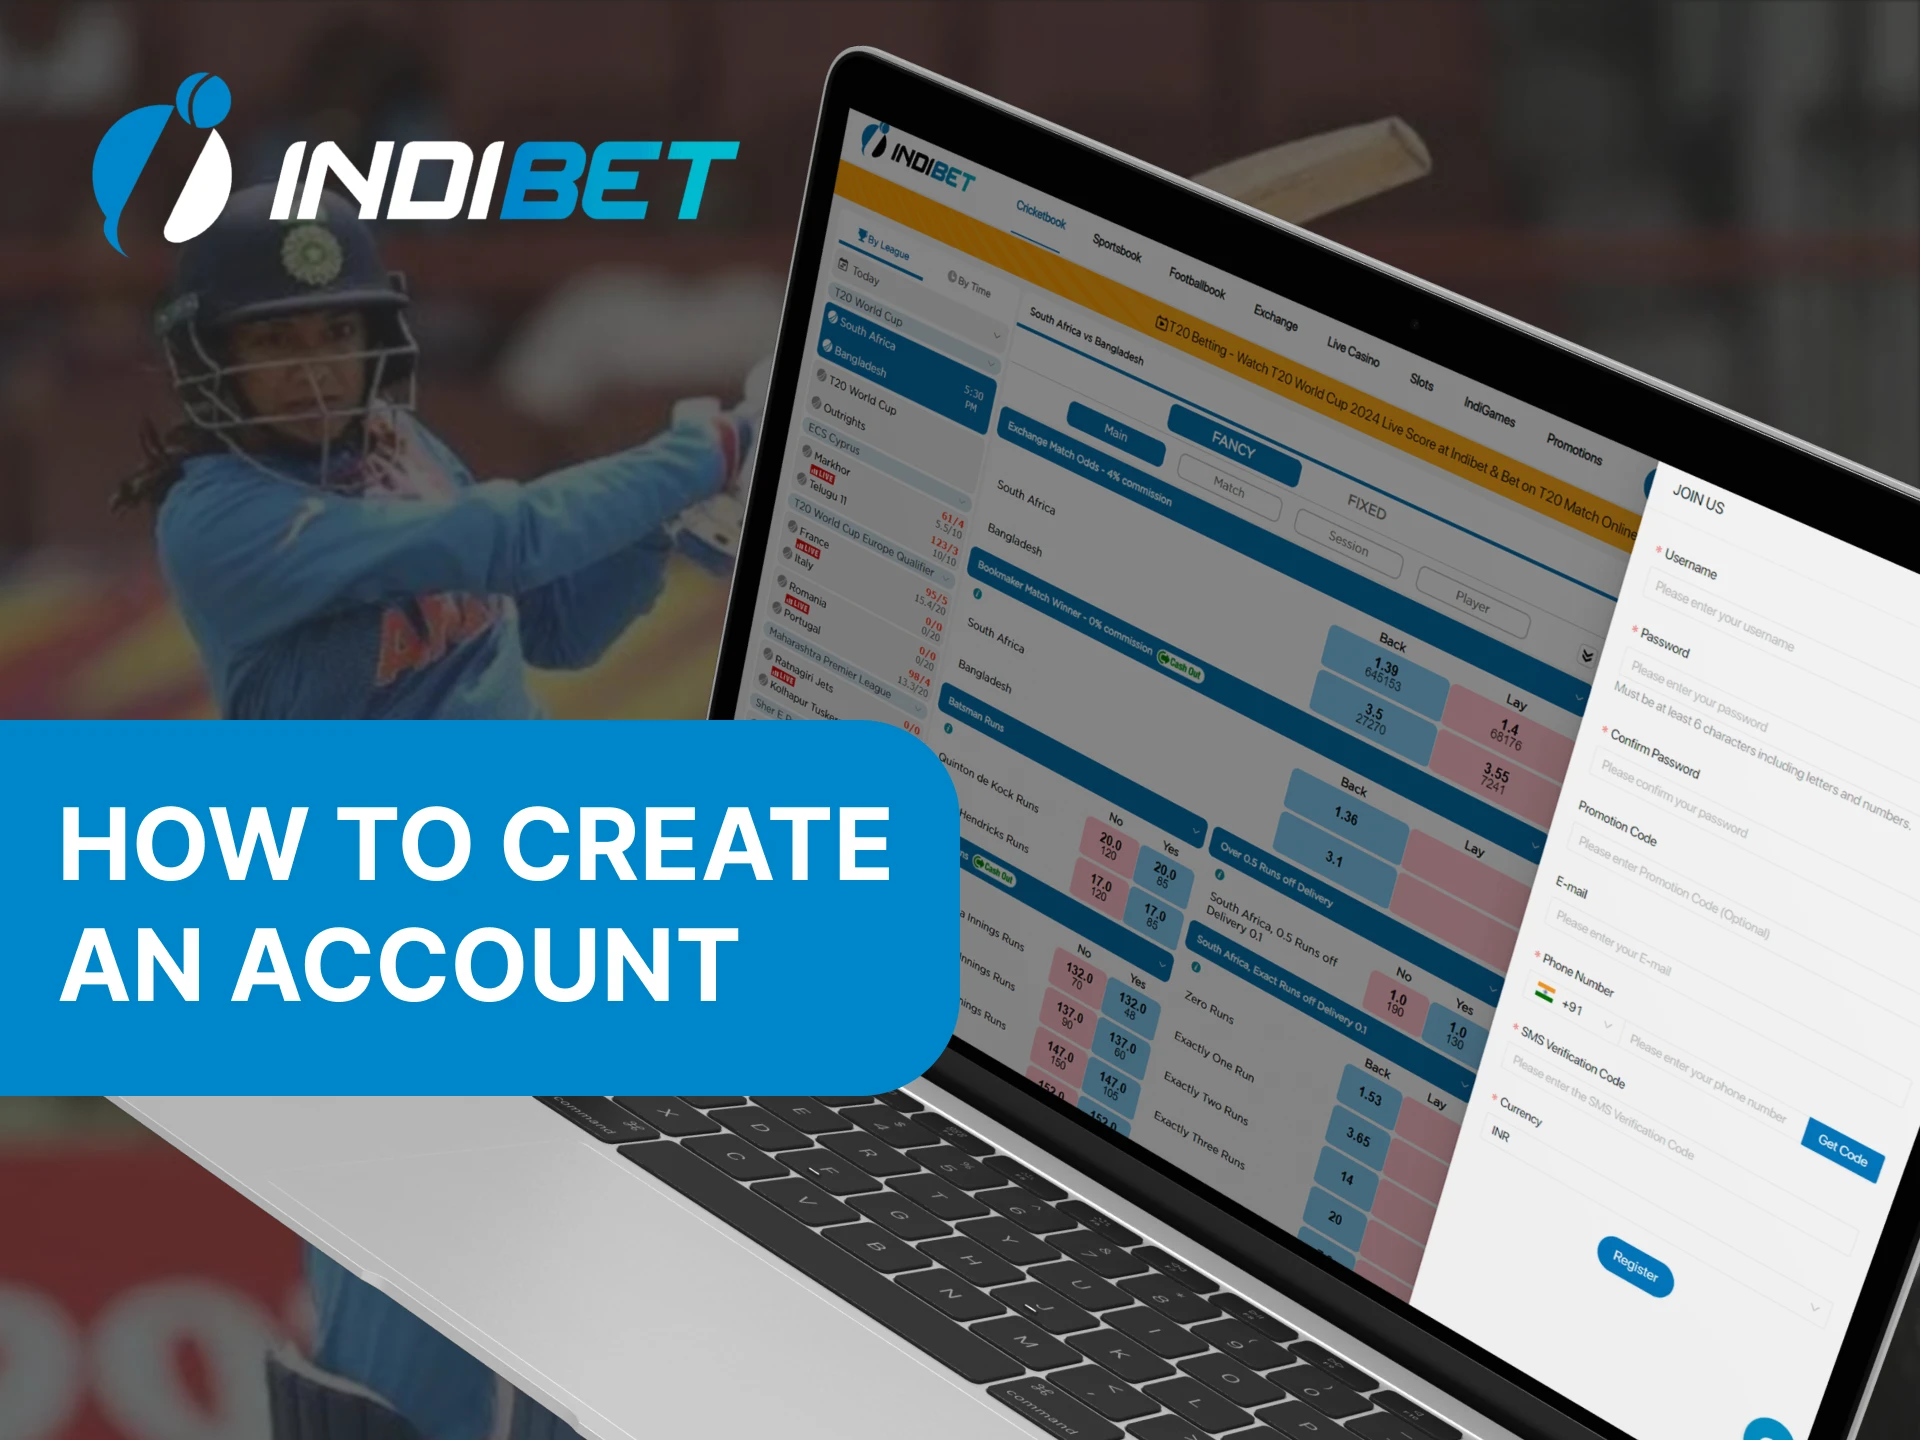 To create an Indibet account, you need to fill out all the required information on the registration form.